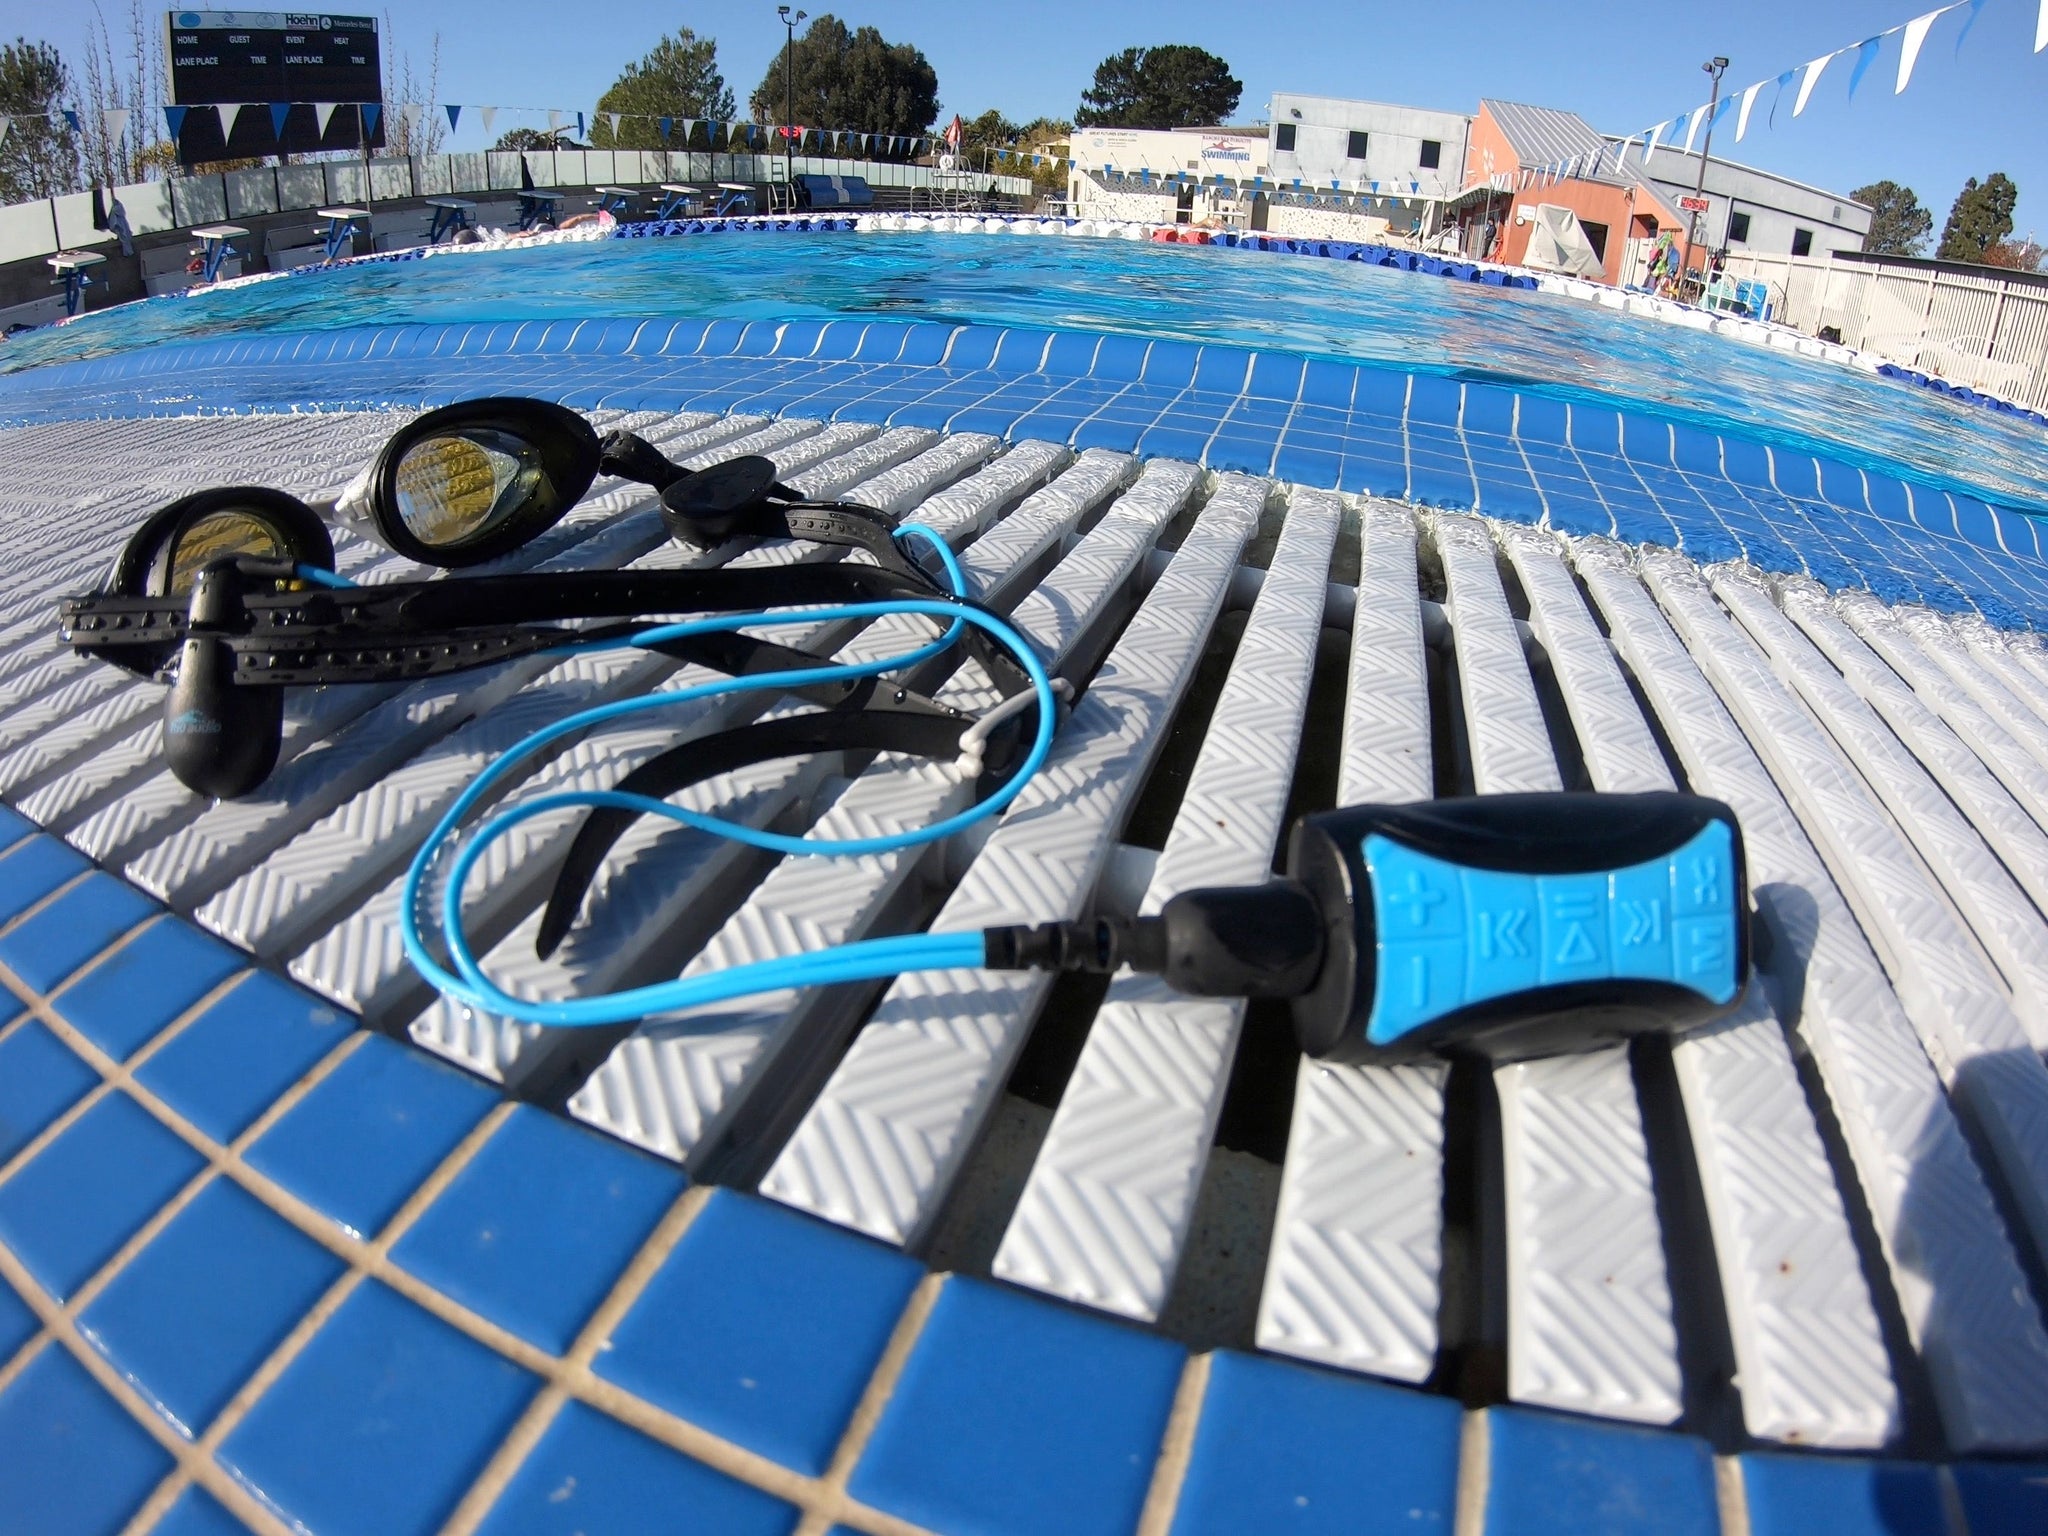 6 Best Underwater and Waterproof MP3 Players for Swimming